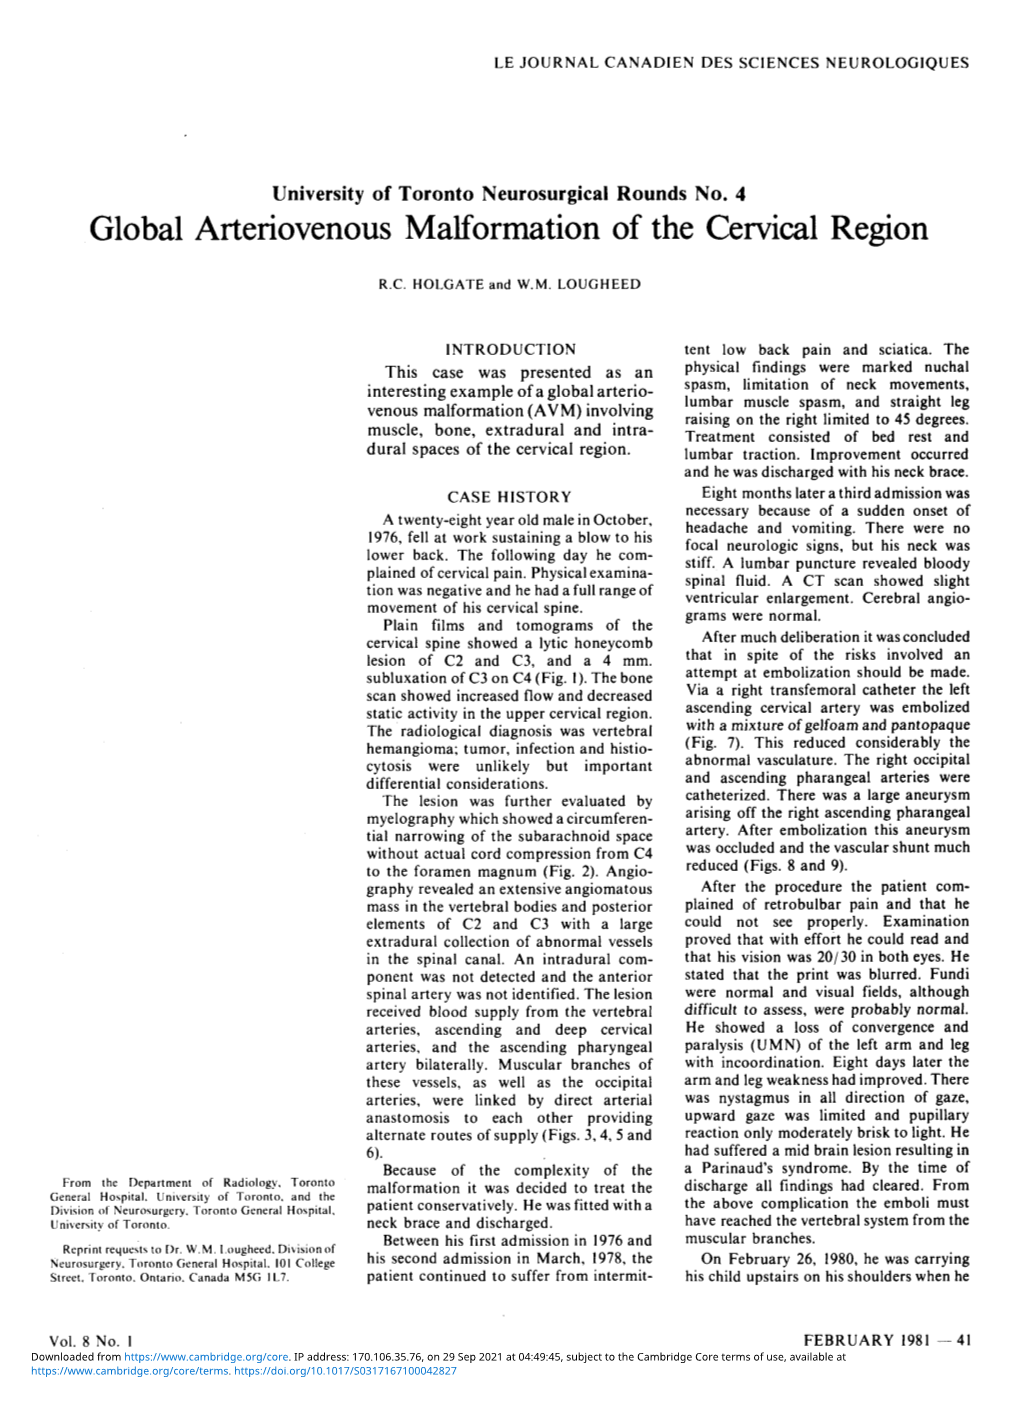 Global Arteriovenous Malformation of the Cervical Region